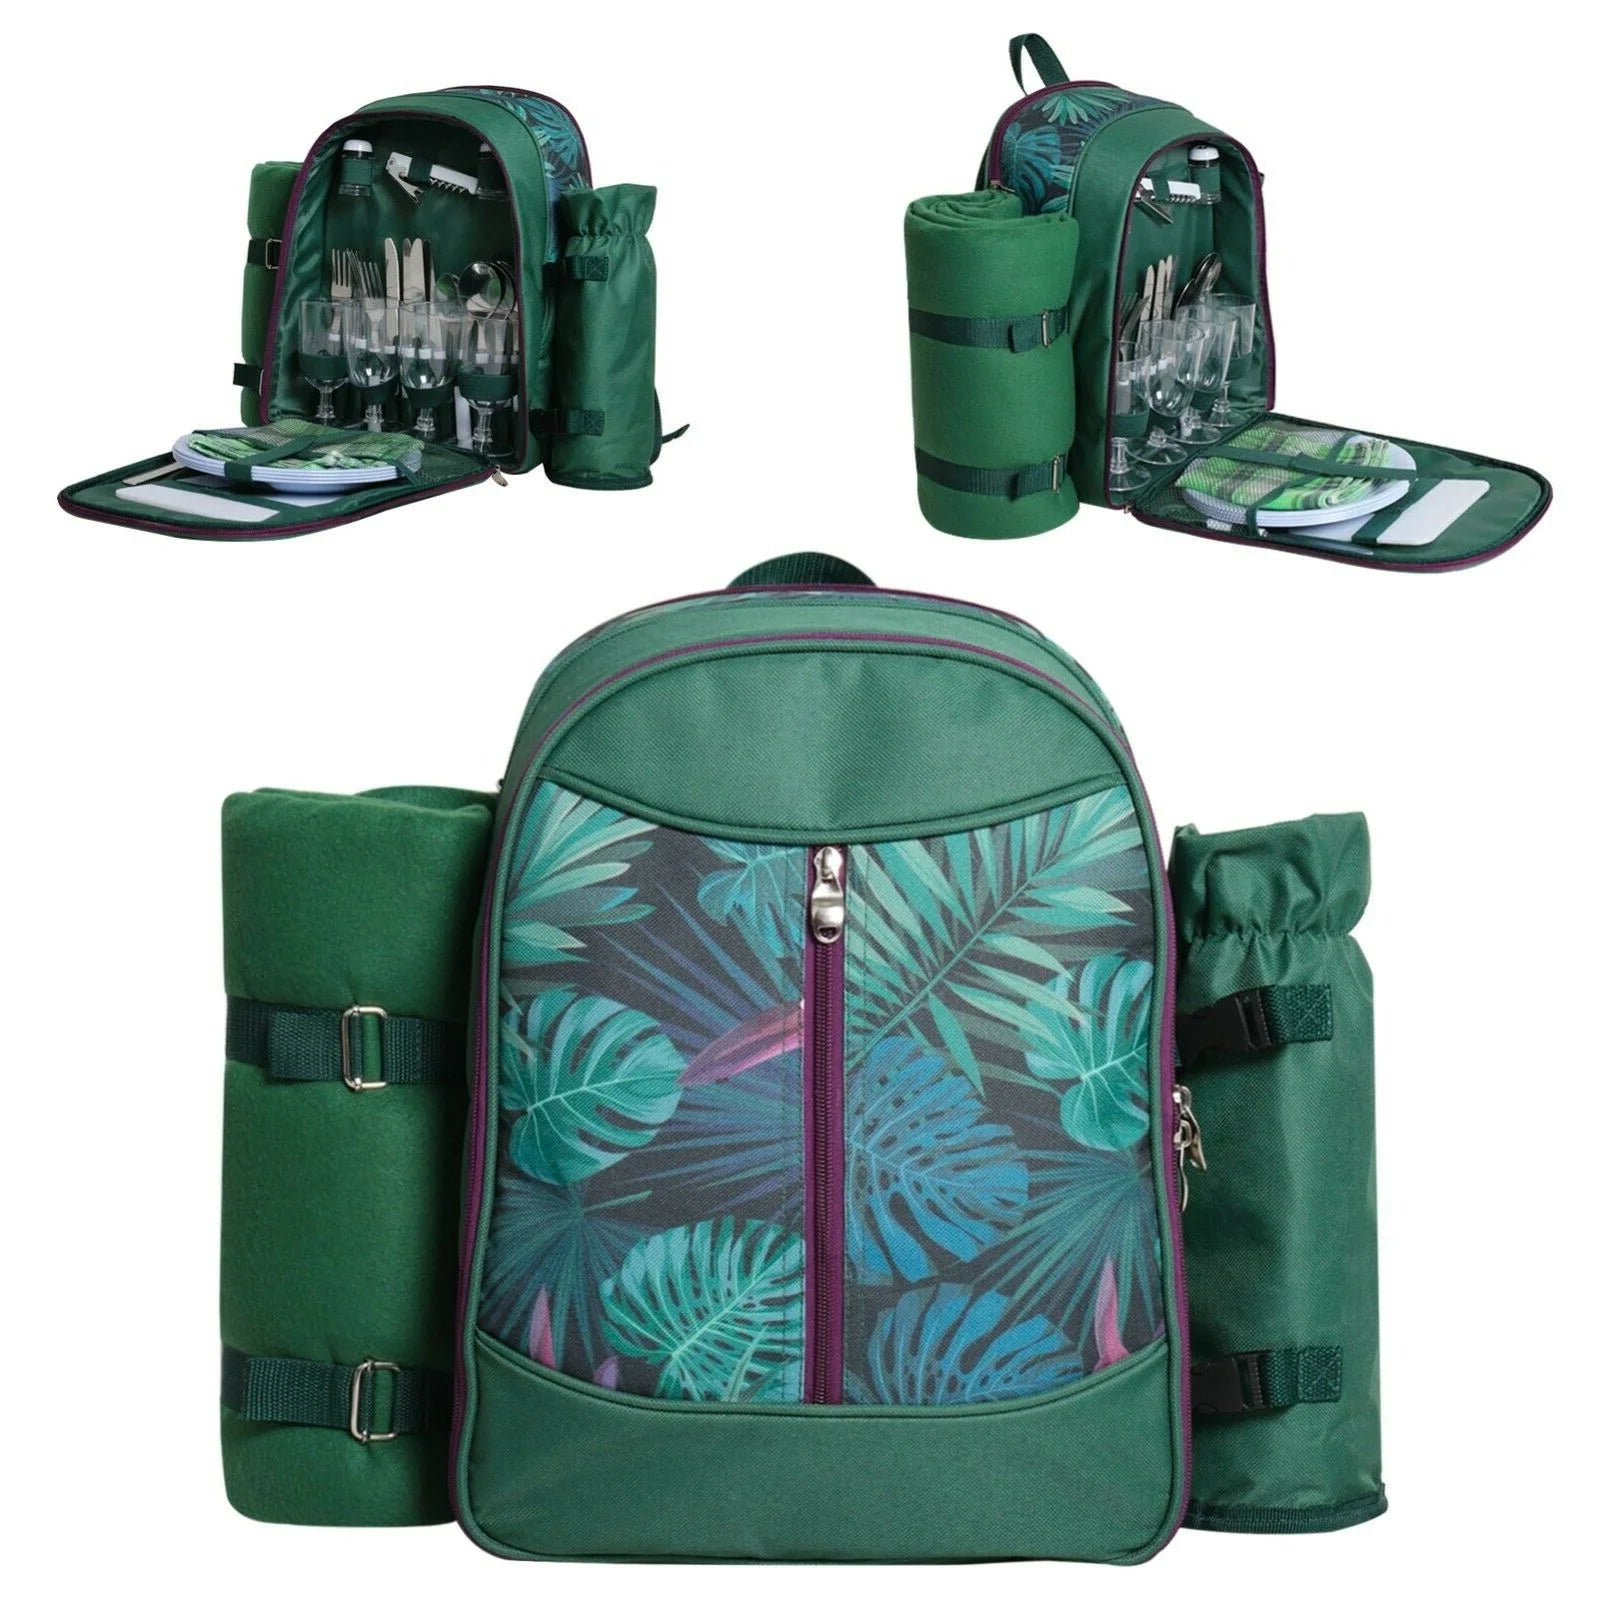 Picnic Backpack with Cutlery Set - Cooler Backpack with Tableware & Outdoor Camping Beach Accessories | 4 Persons Bag